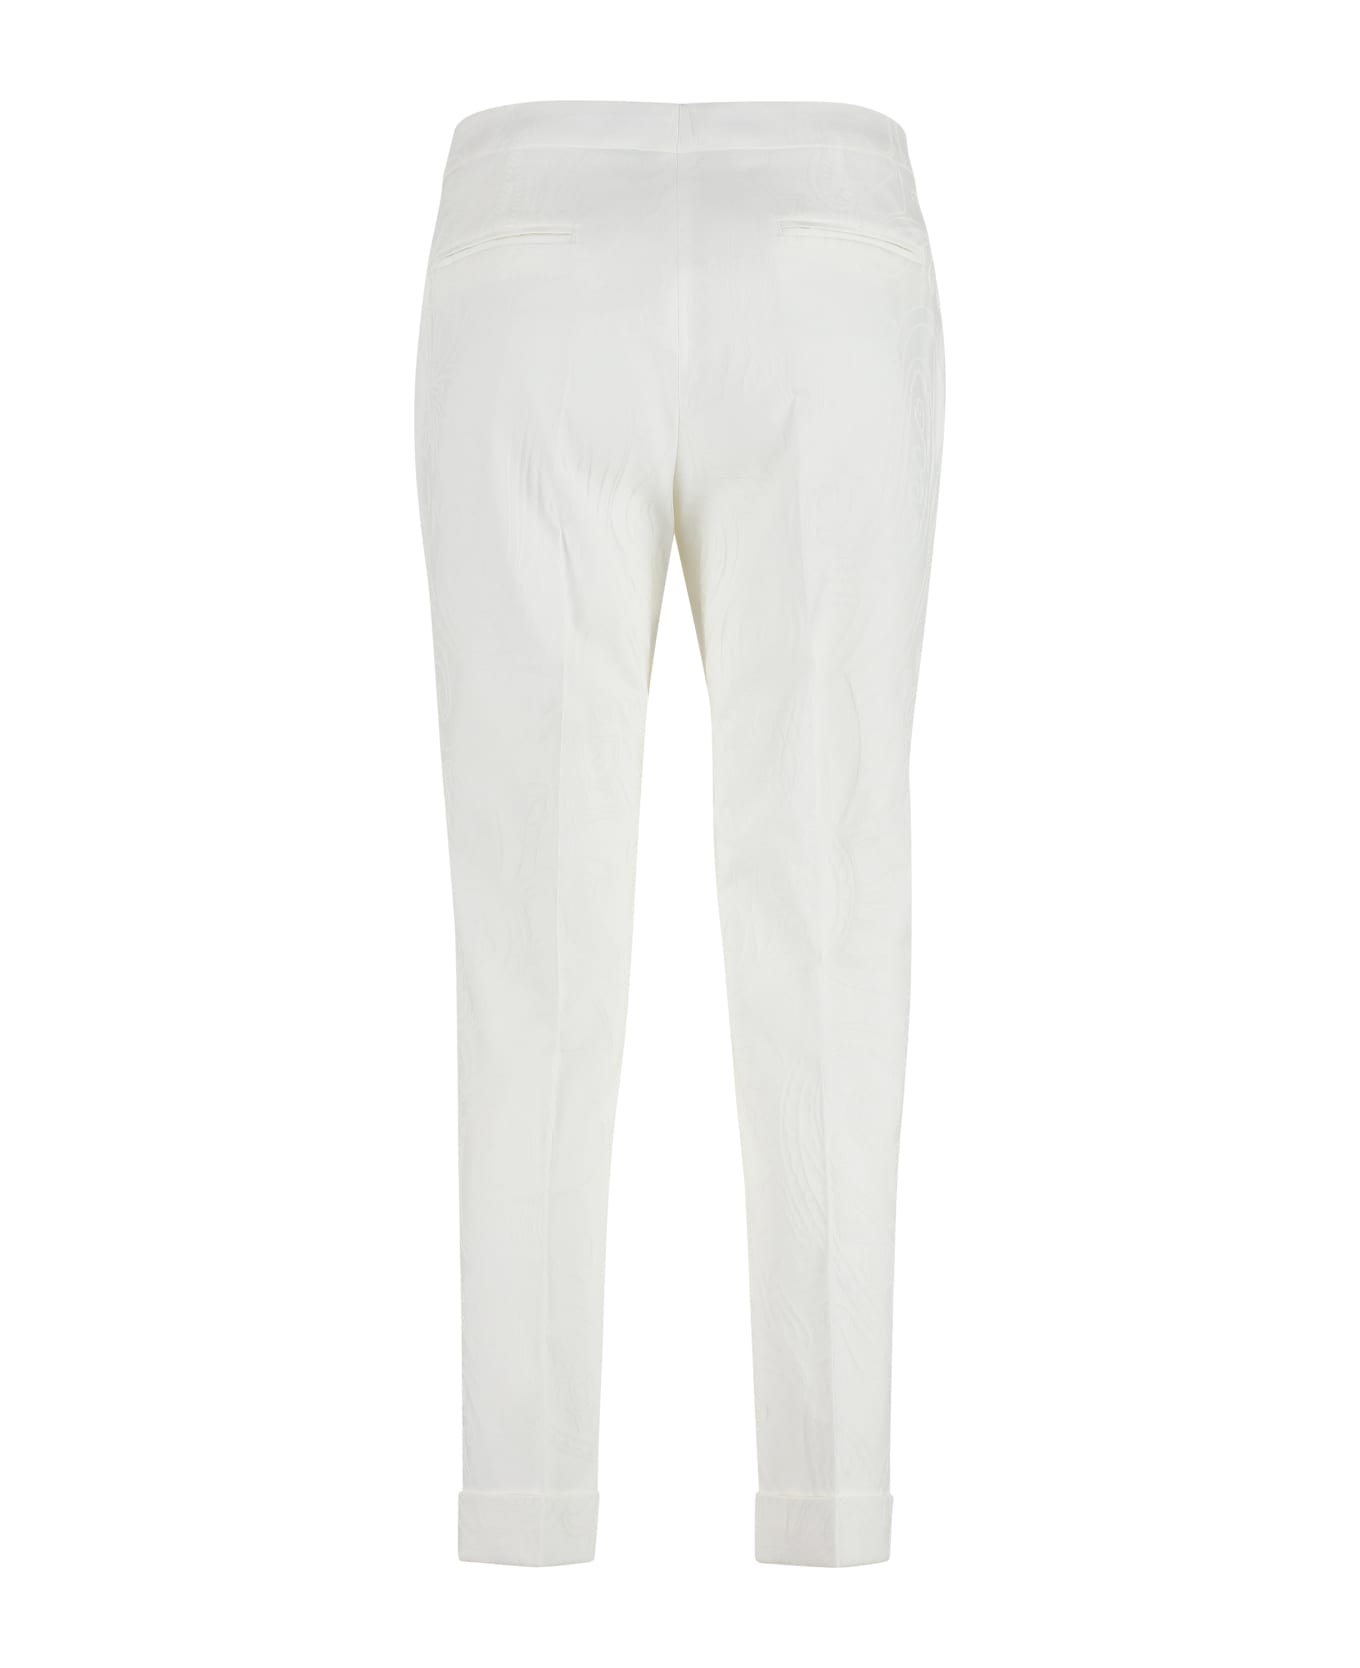 Etro Tailored Trousers - White ボトムス